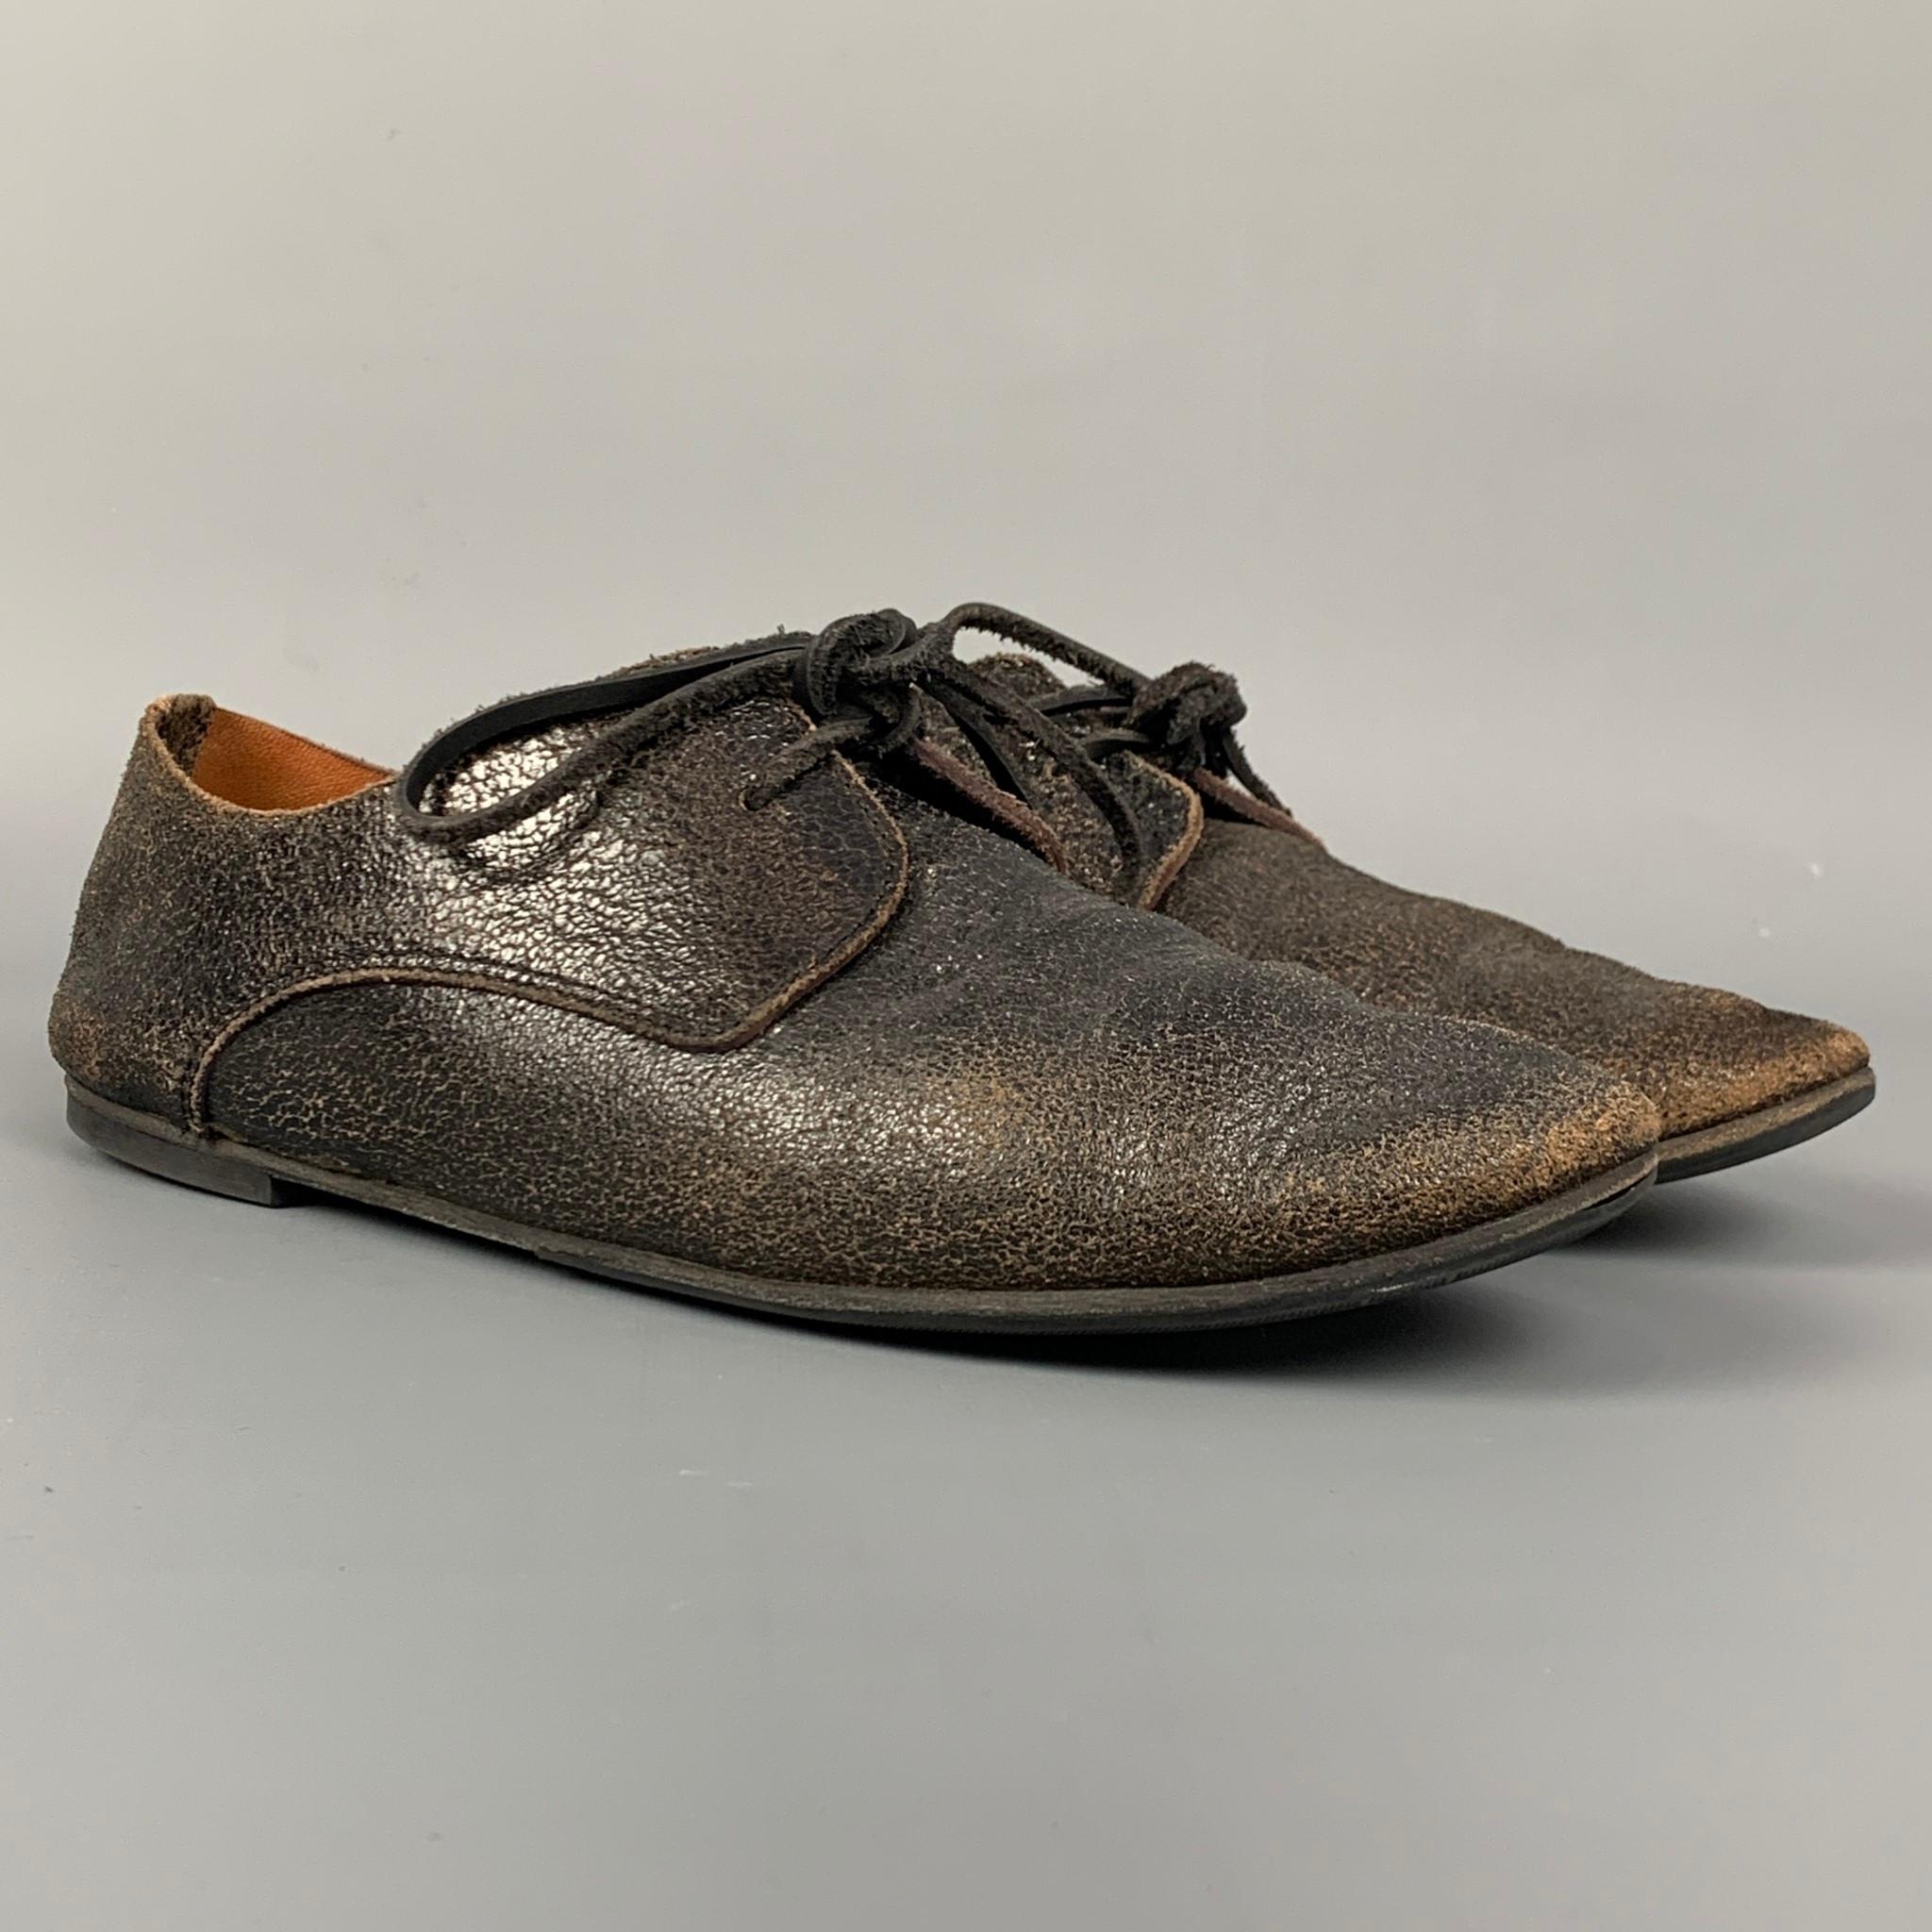 MARSELL flat laces comes in a dark brown cracked leather featuring a rubber sole and lace up closure. Made in Italy.

Good Pre-Owned Condition.
Marked: 37.5
Original Retail Price: $800.00

Outsole: 3 in. x 10 in. 